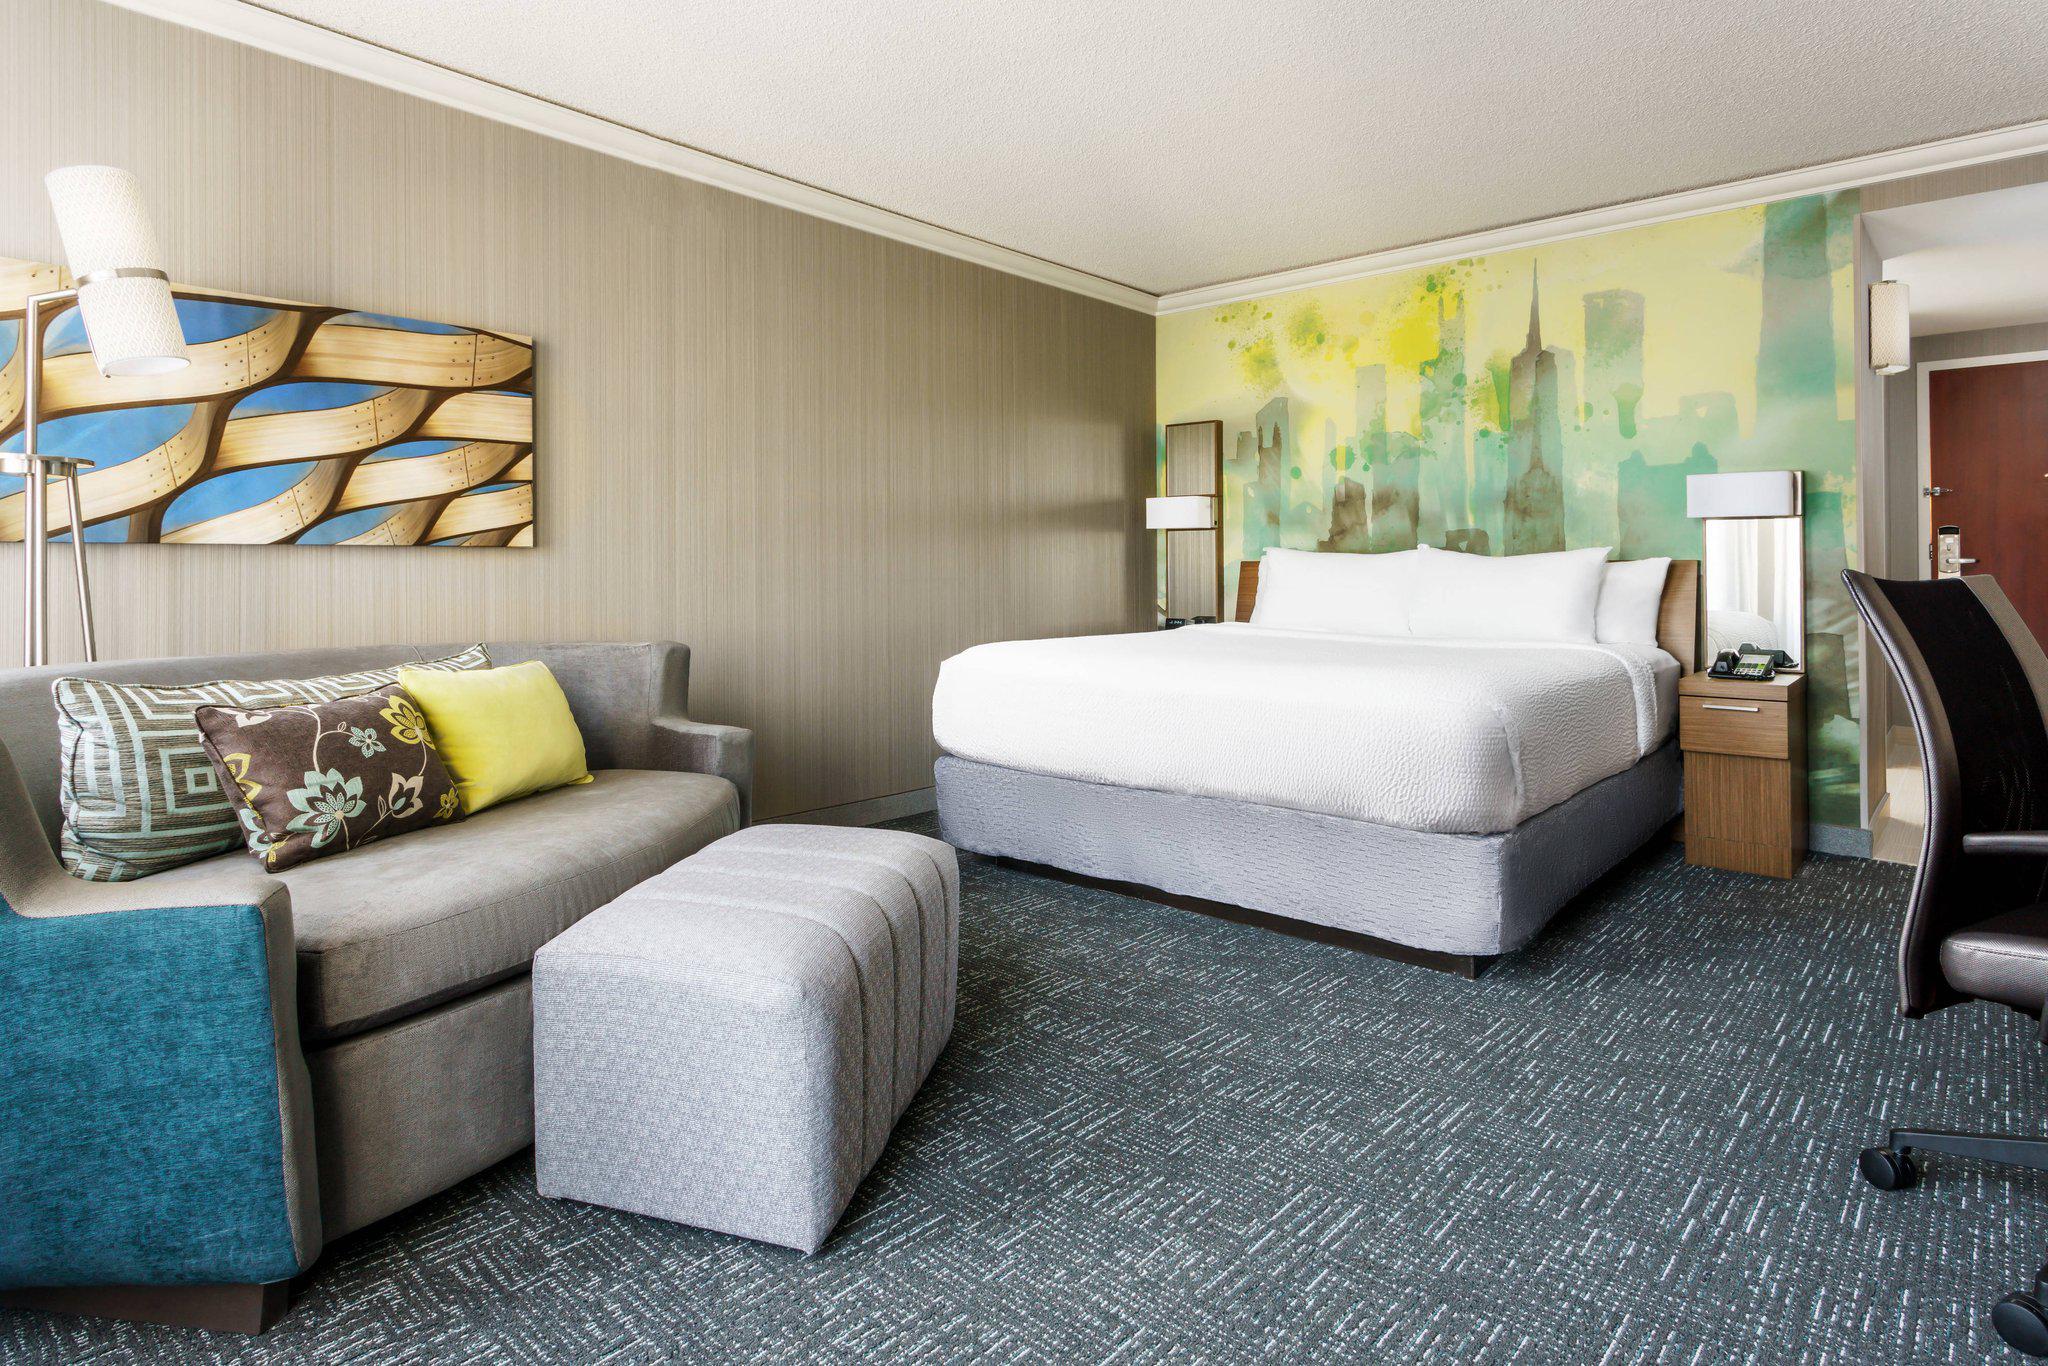 Courtyard by Marriott Chicago Downtown/Magnificent Mile - OPEN Photo